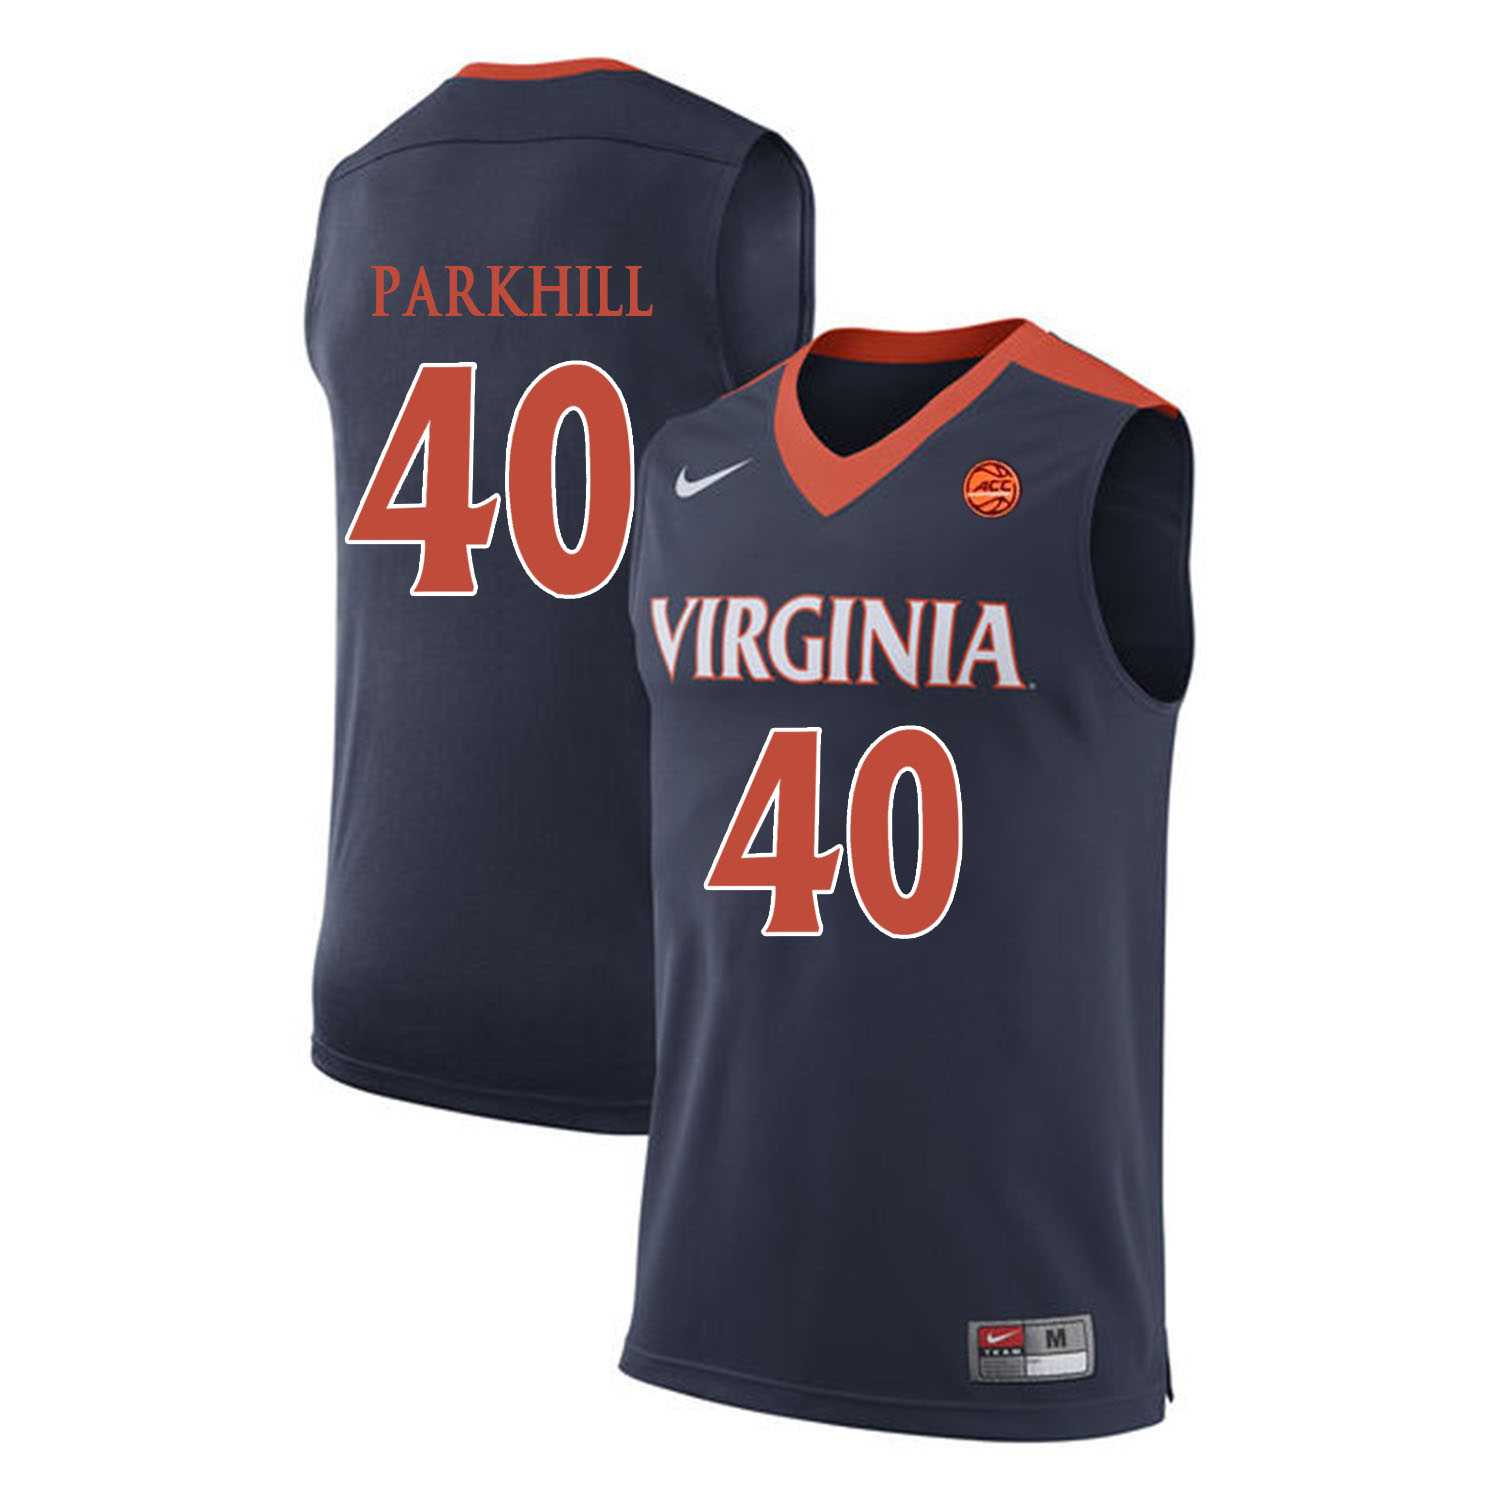 Virginia Cavaliers #40 Barry Parkhill Navy College Basketball Jersey